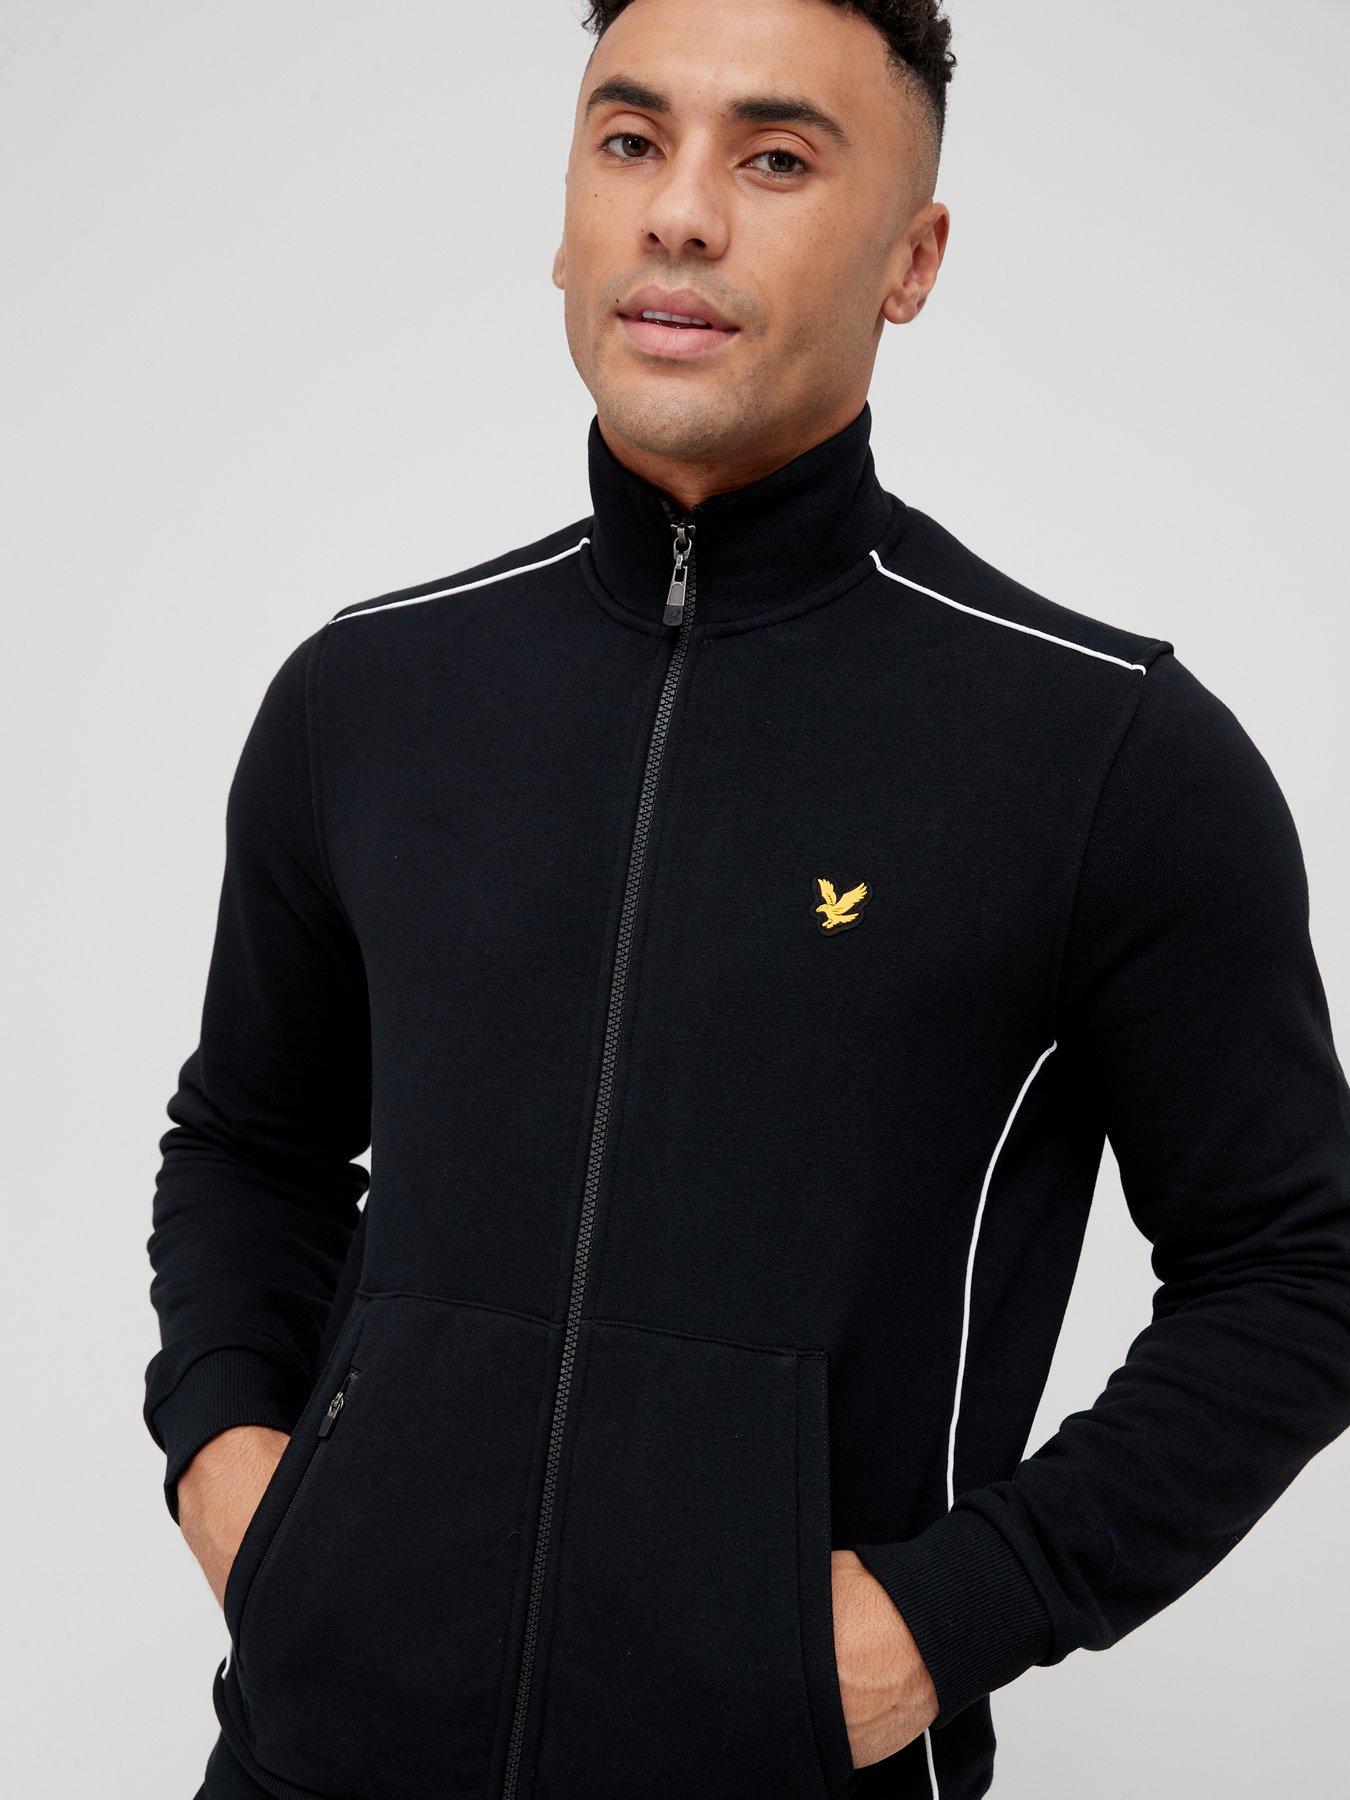  Contrast Piping Tracksuit - Black